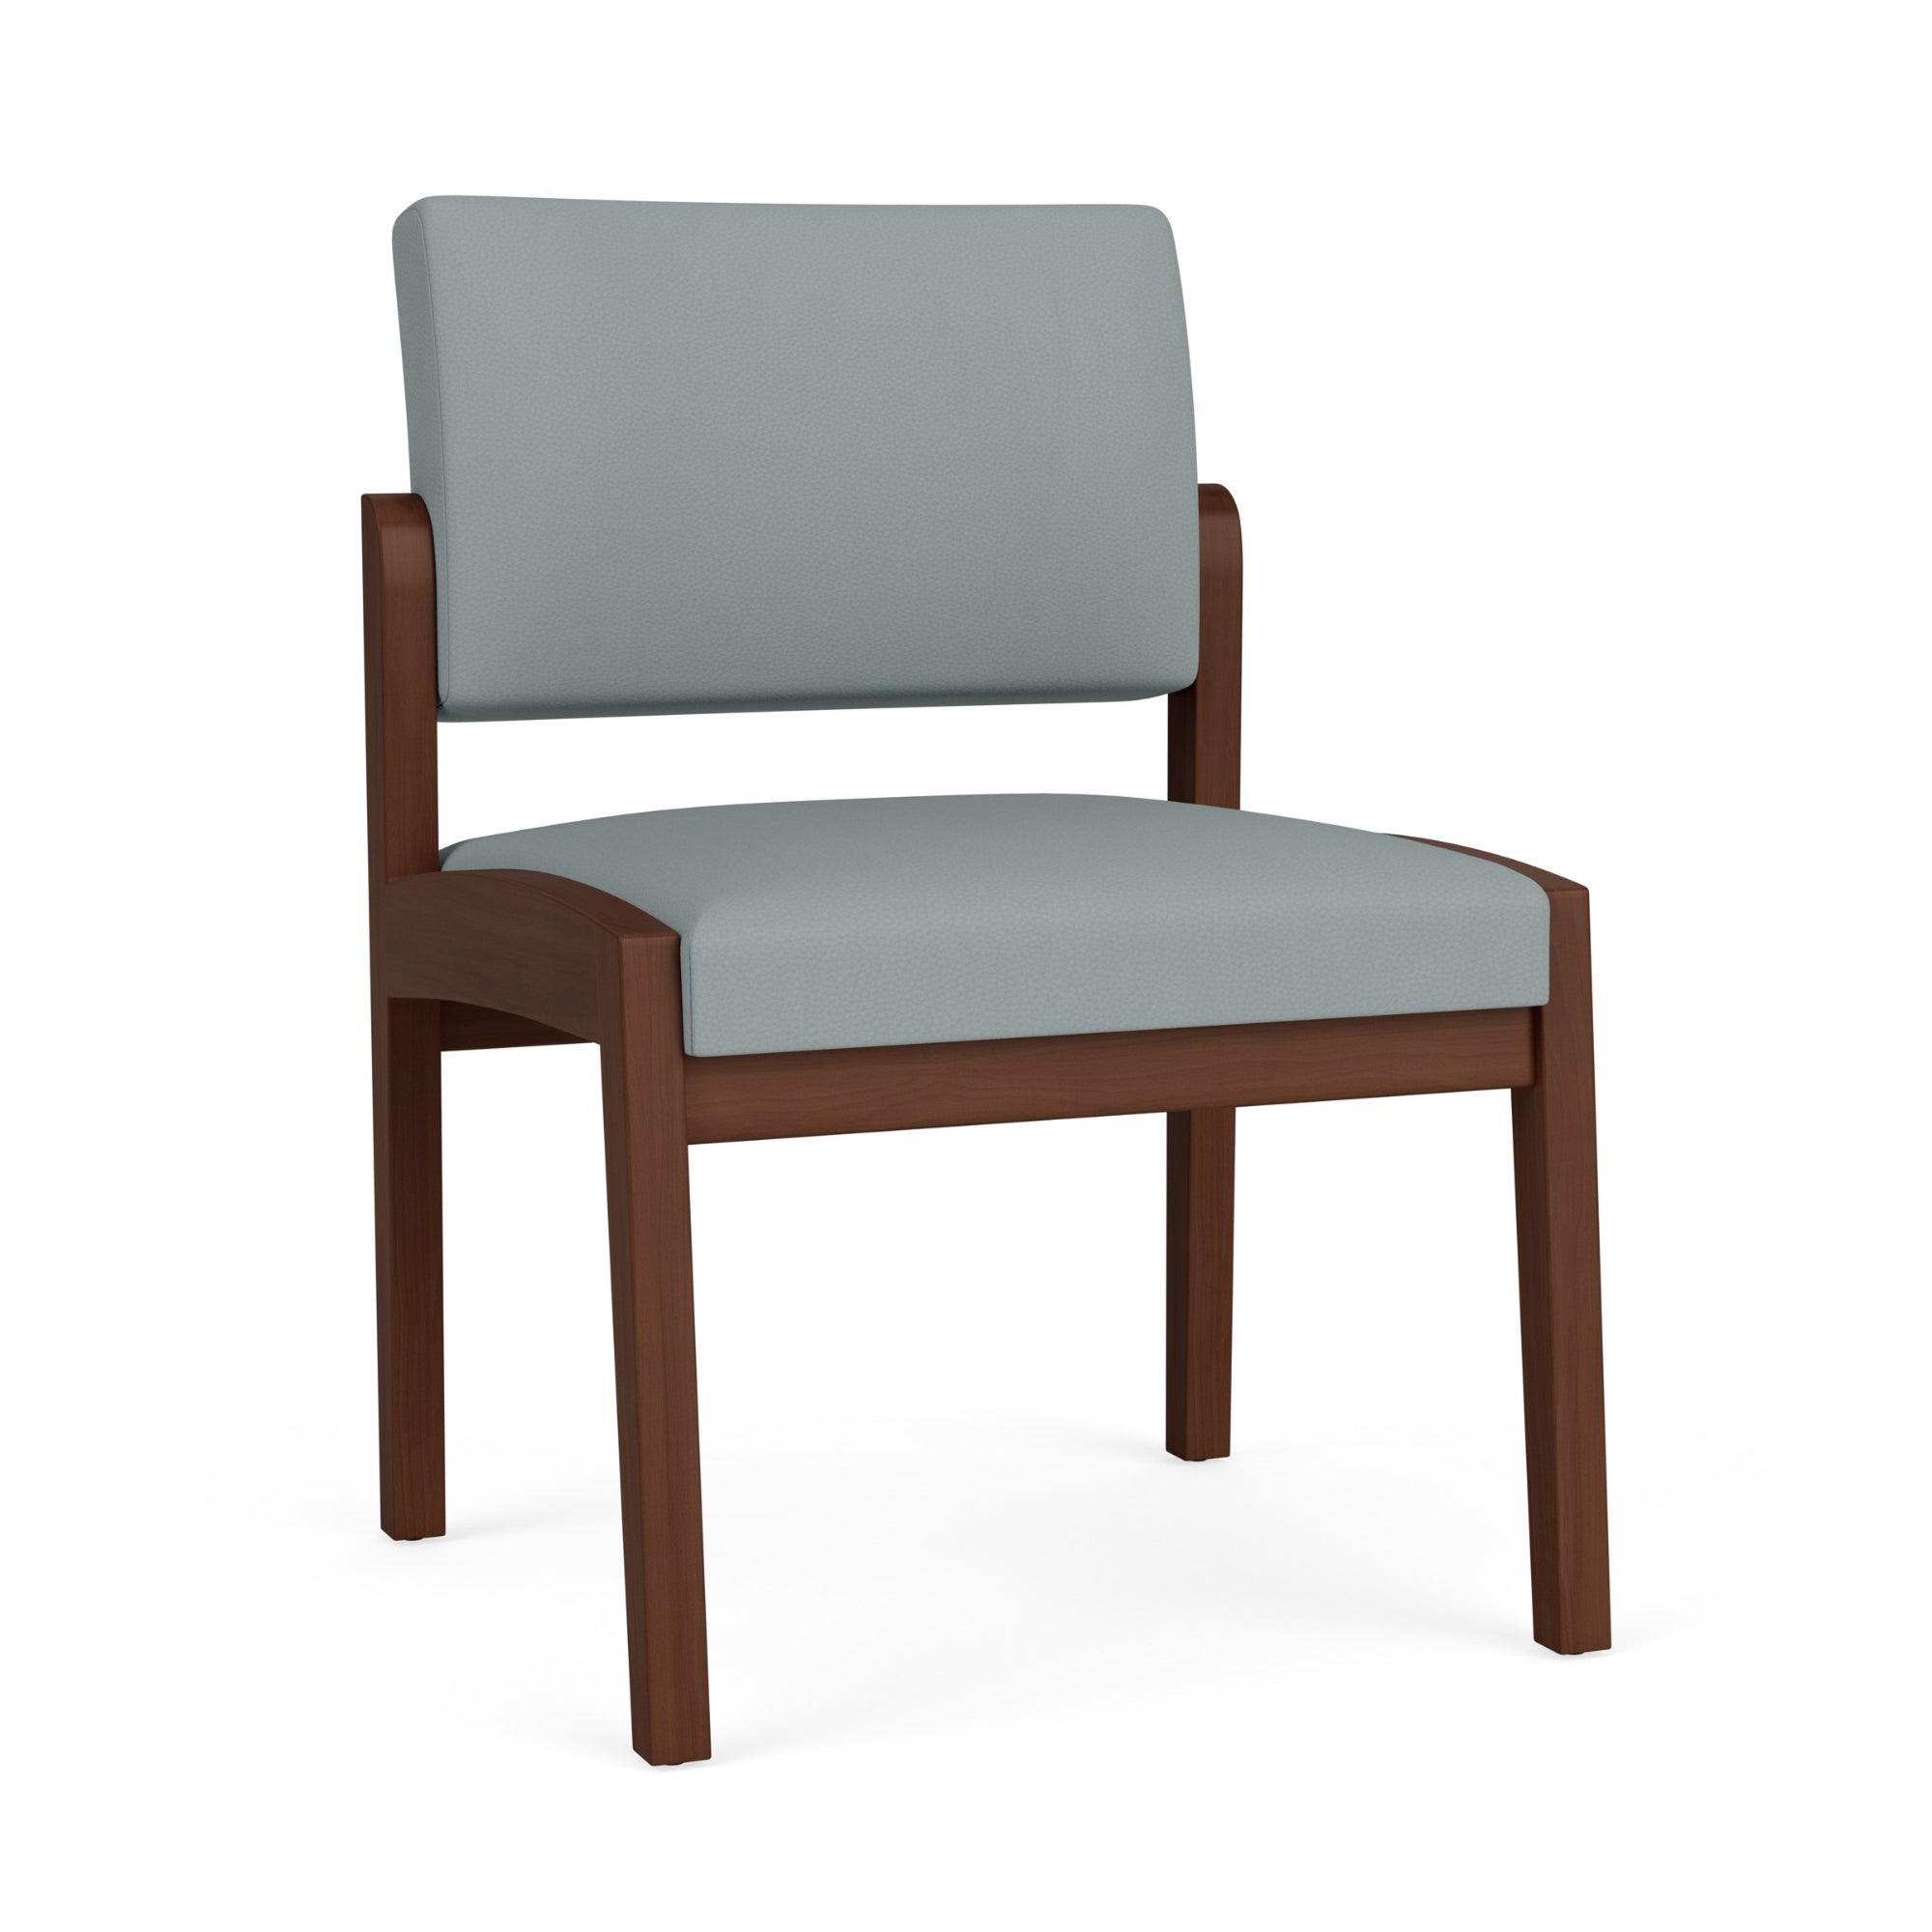 Lenox Wood Collection Reception Seating, Armless Guest Chair, Standard Vinyl Upholstery, FREE SHIPPING